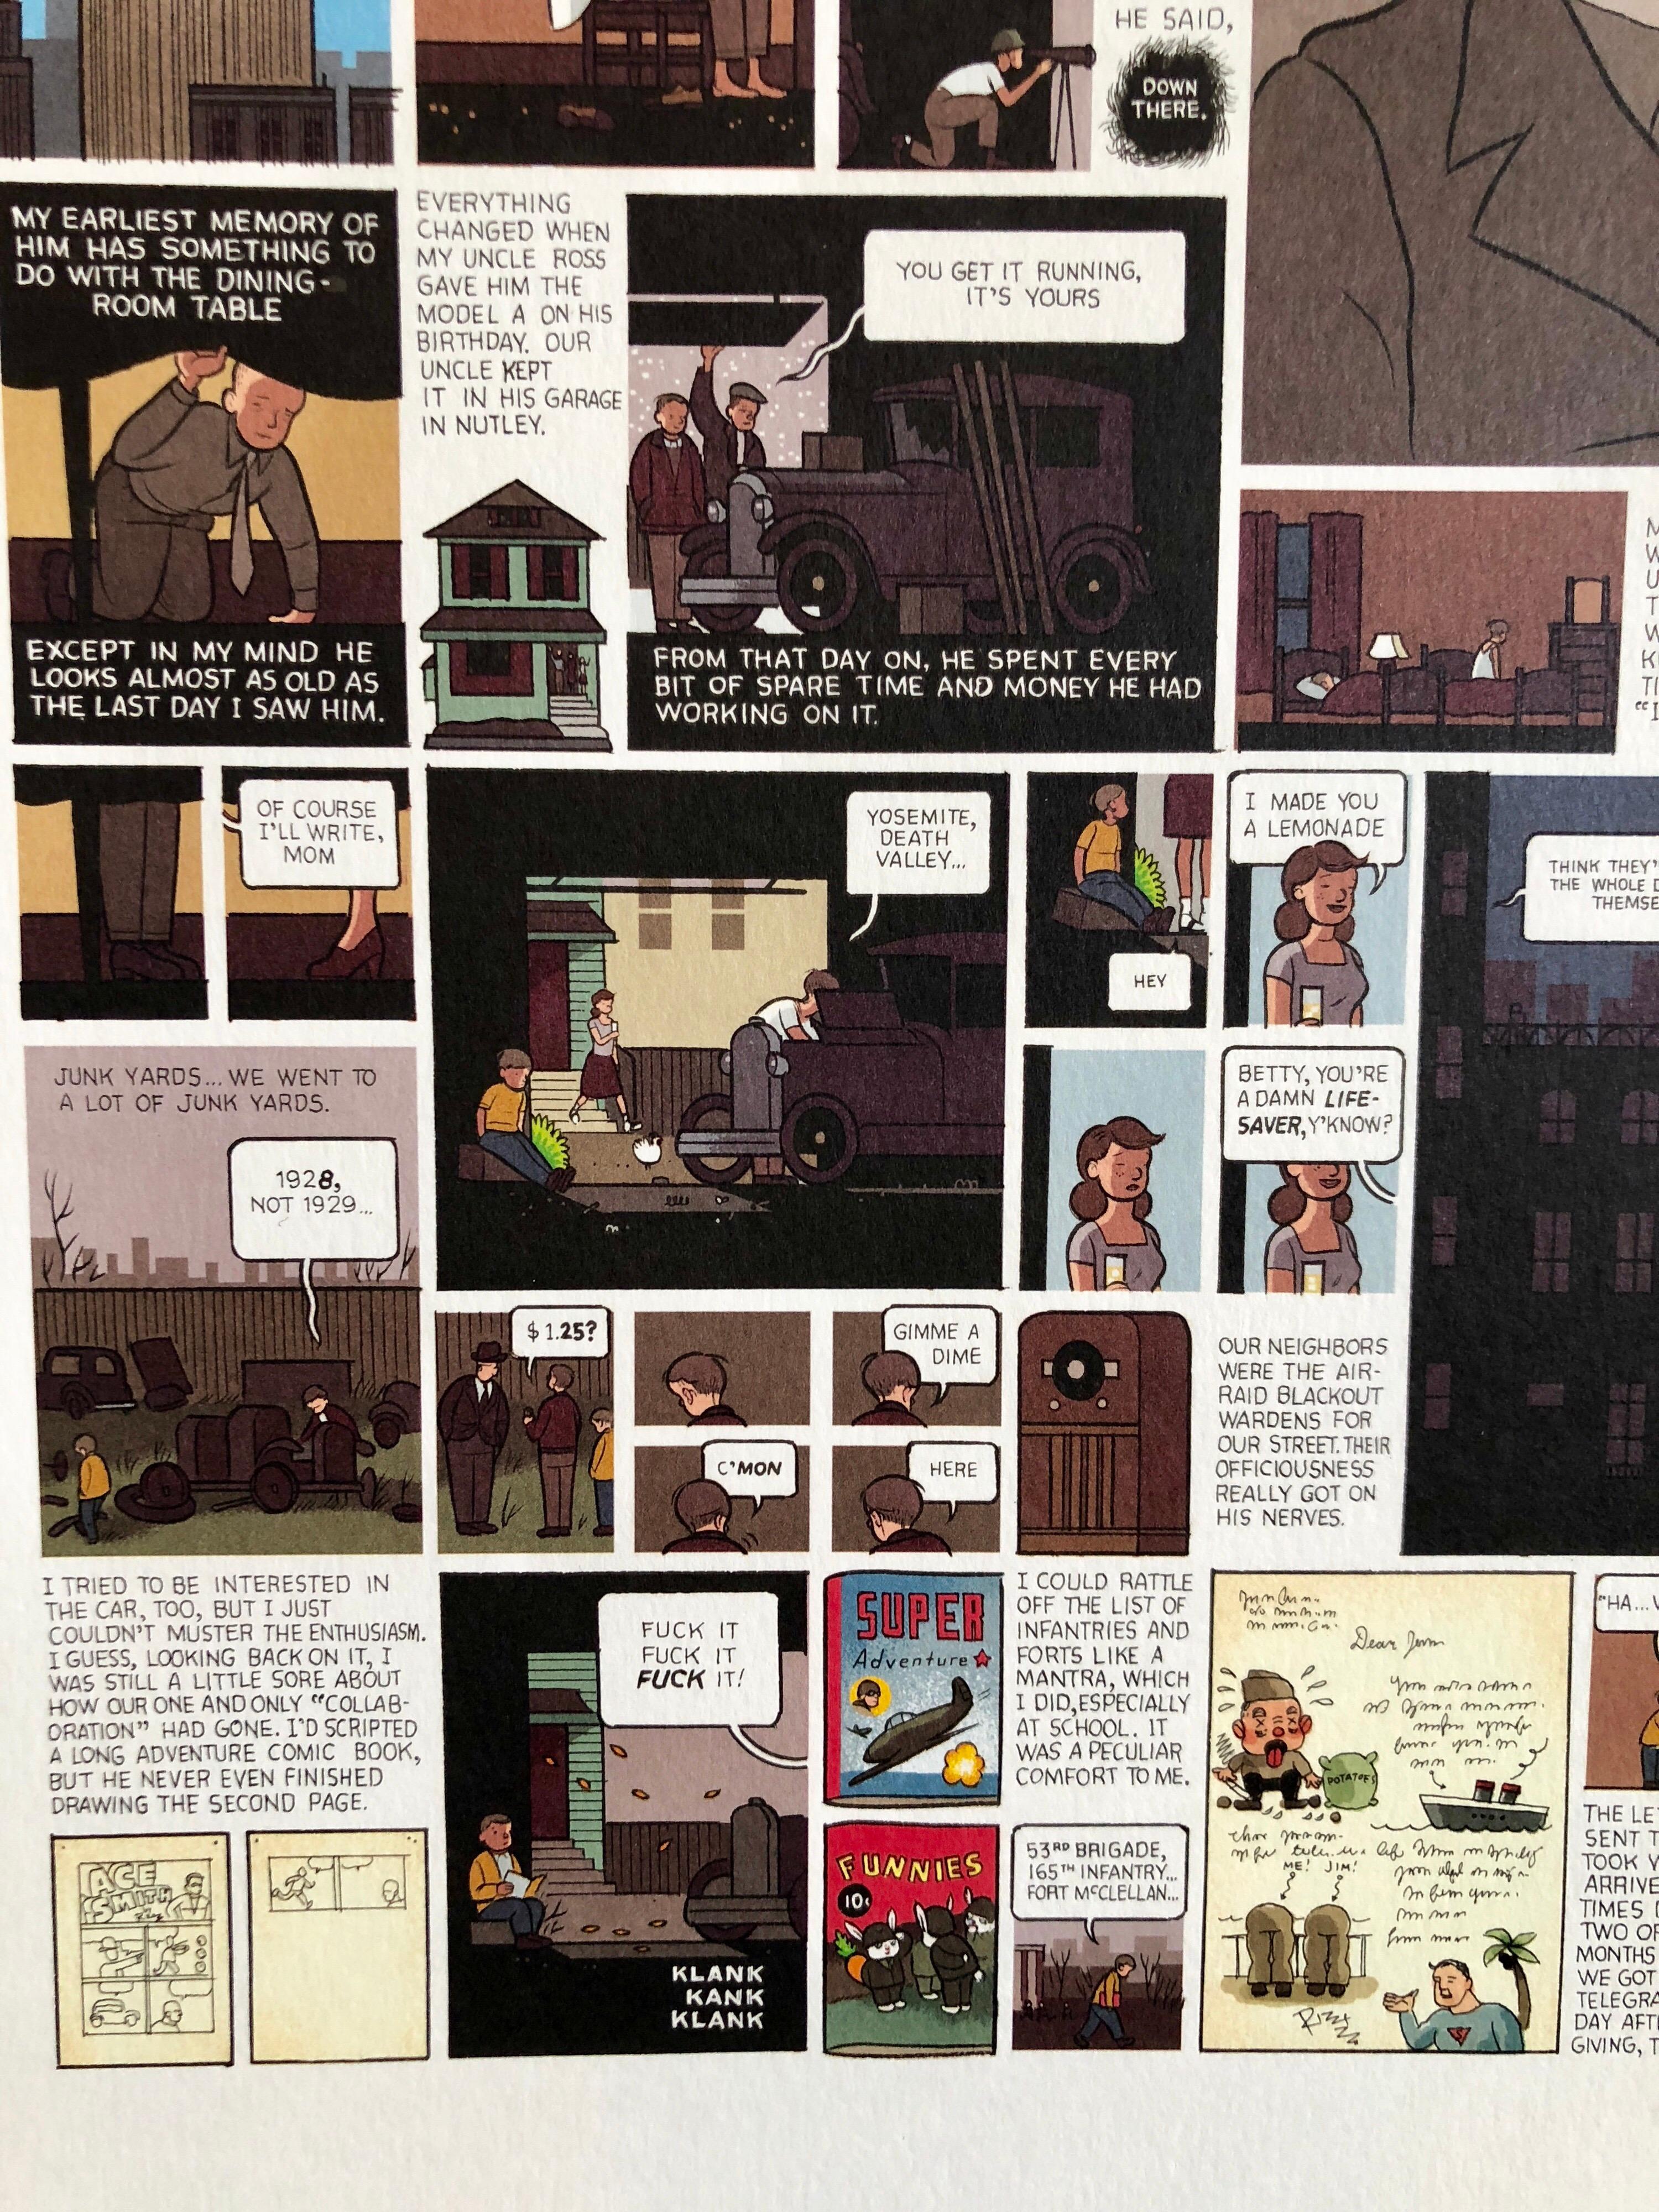 Chris Ware New Yorker Cartoonist Limited Edition Thanksgiving Print NYC 1